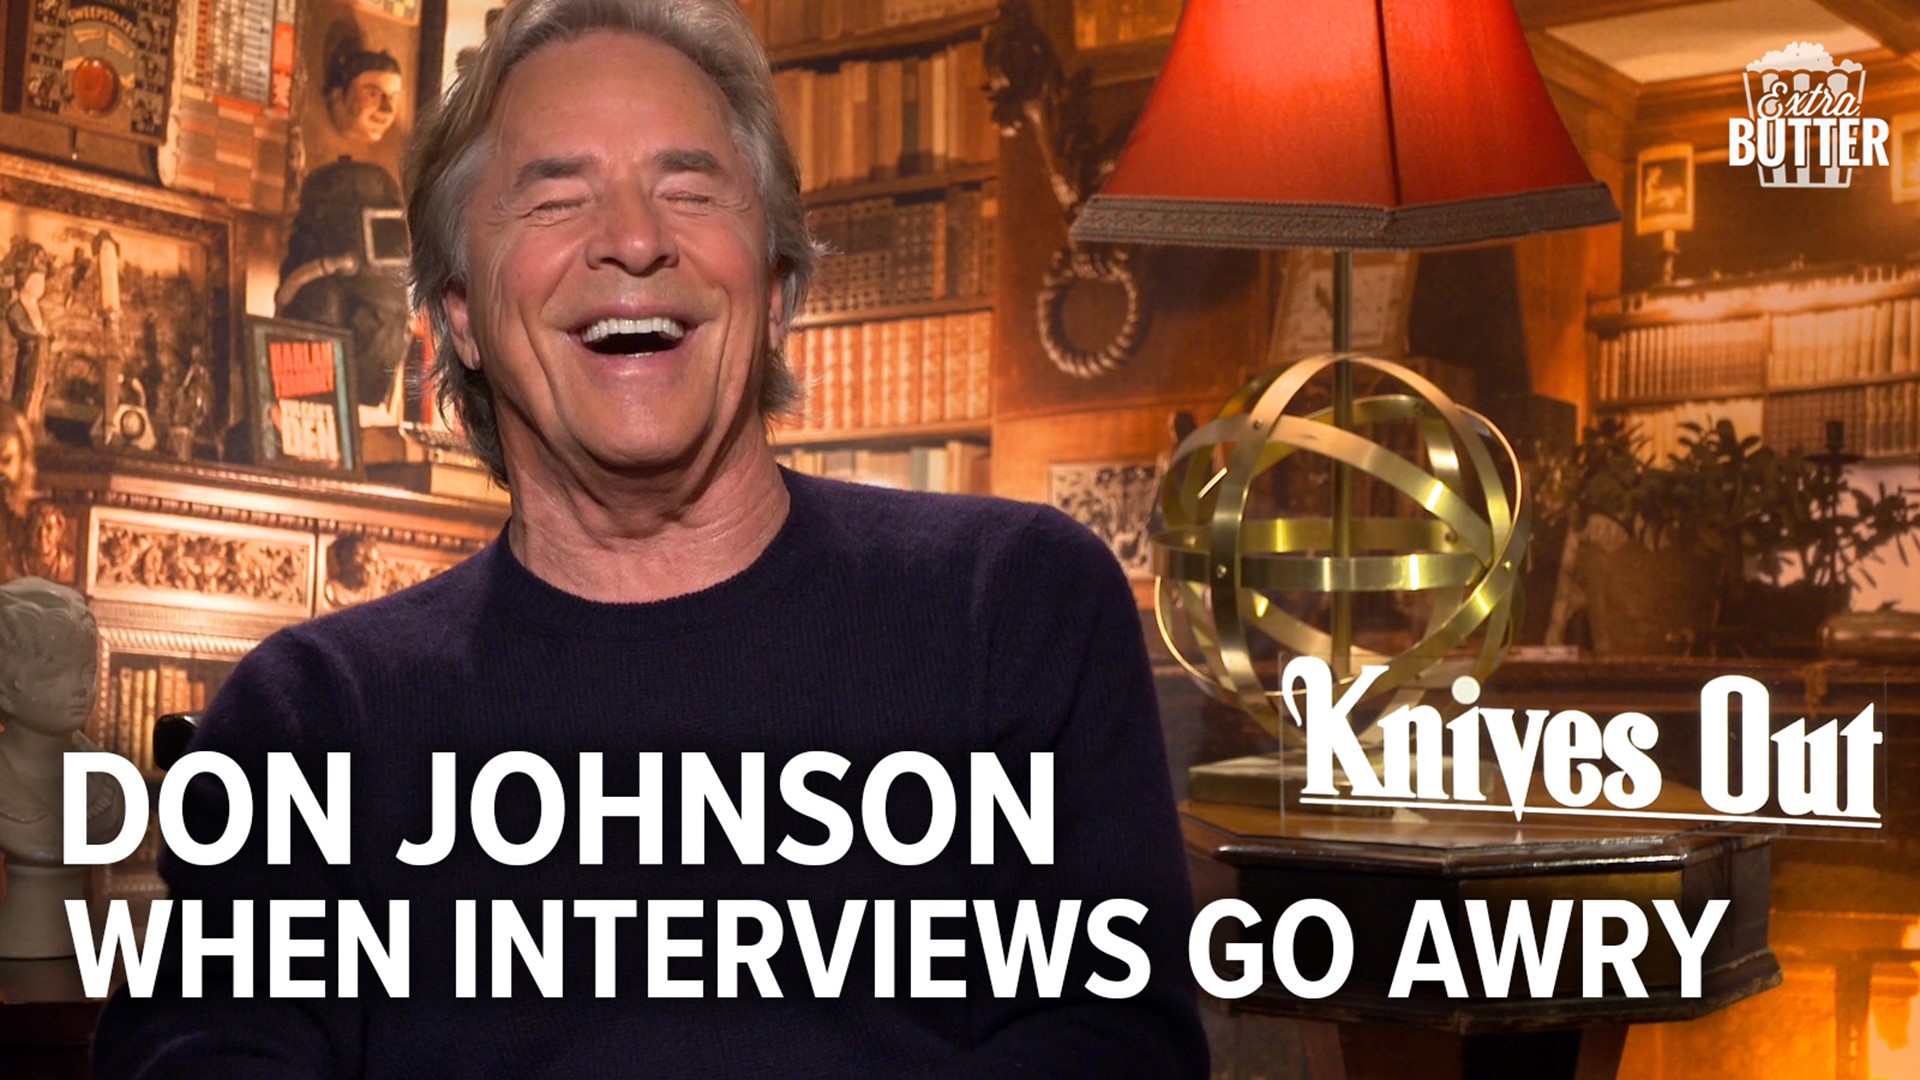 Don Johnson can't help but laugh when this funny interview for 'Knives Out' goes awry. It starts with Mark S. Allen knocking over a sign for the movie.